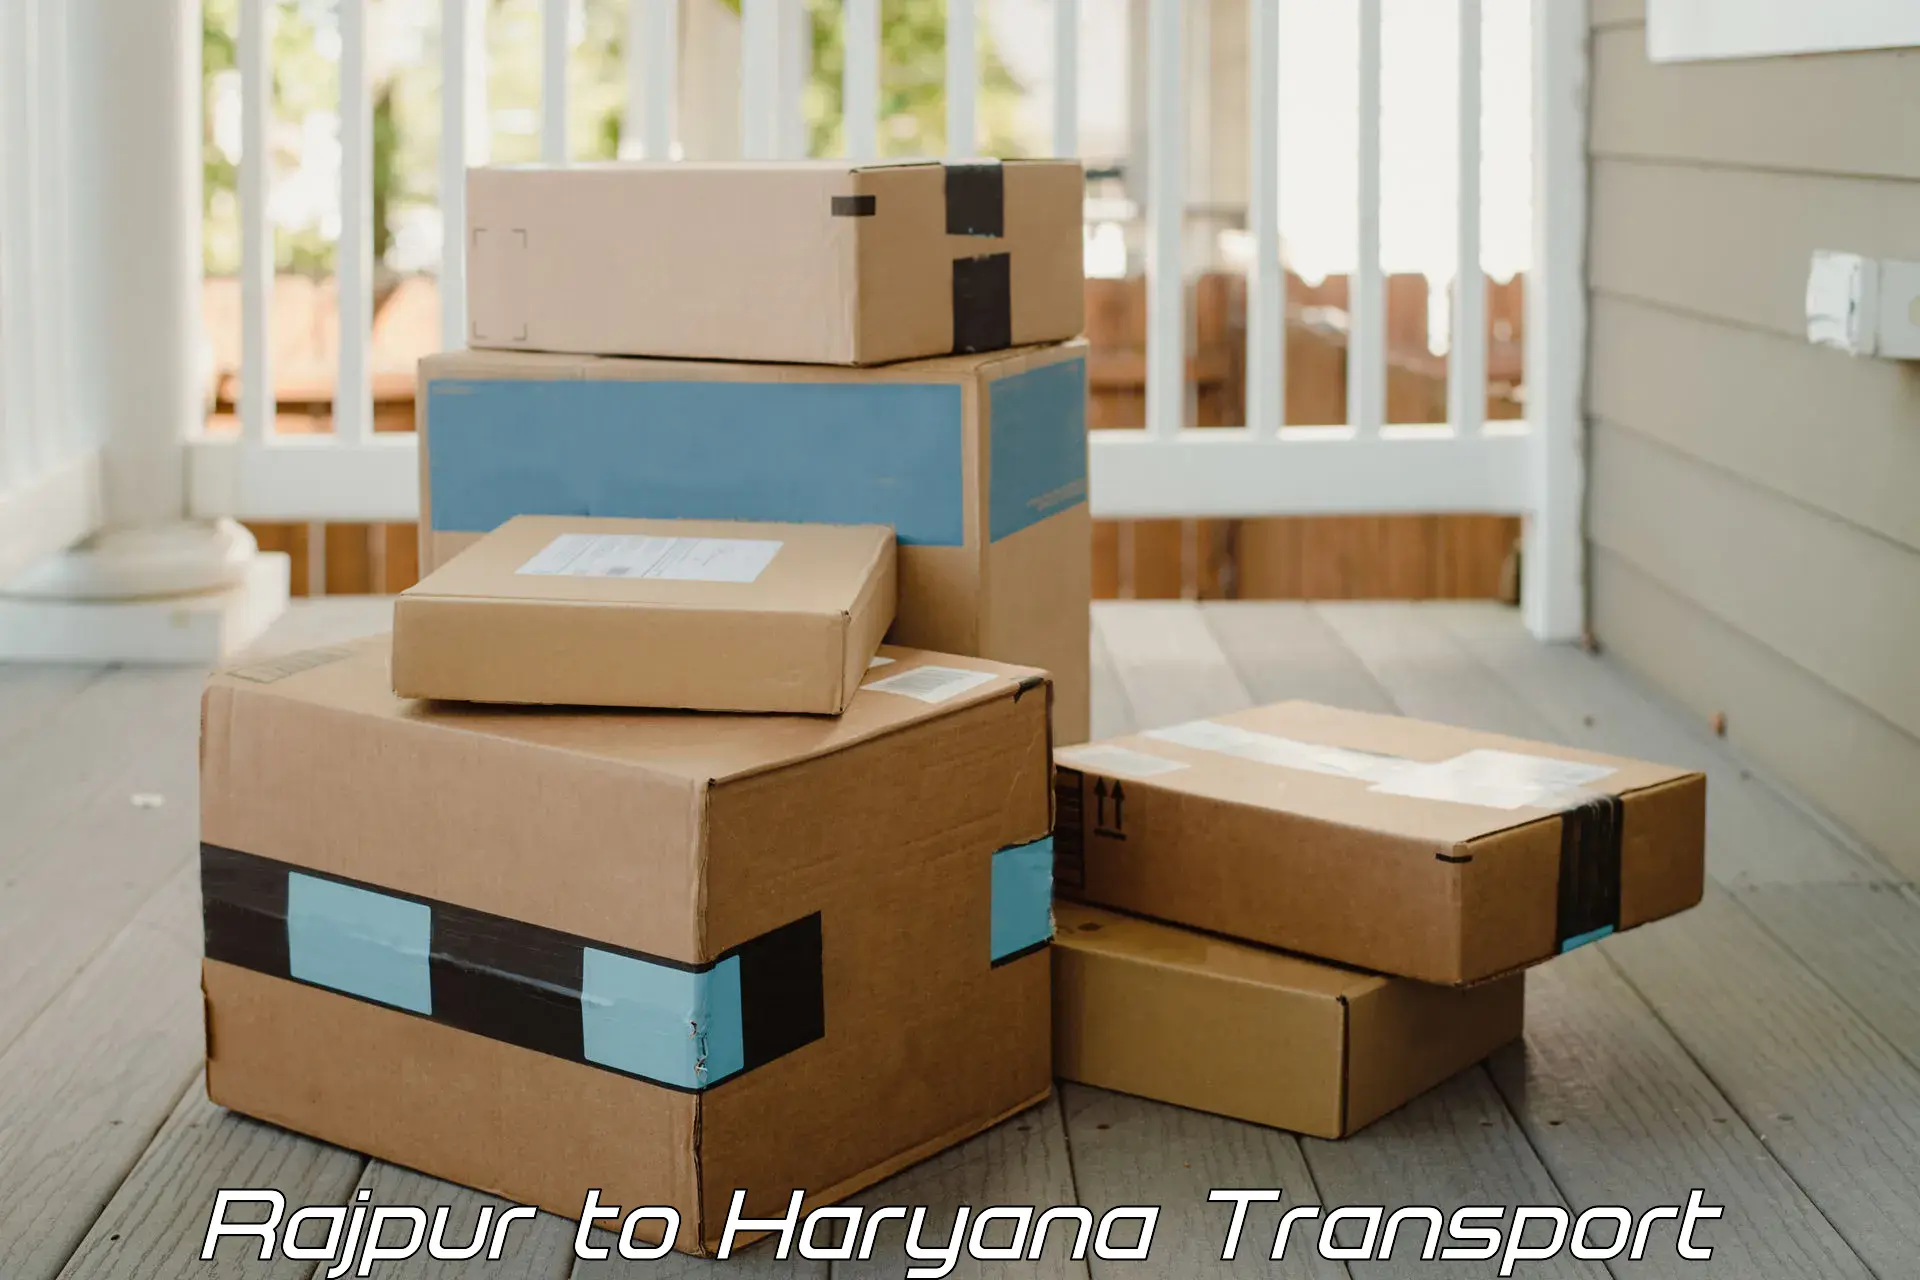 Vehicle transport services in Rajpur to Hisar